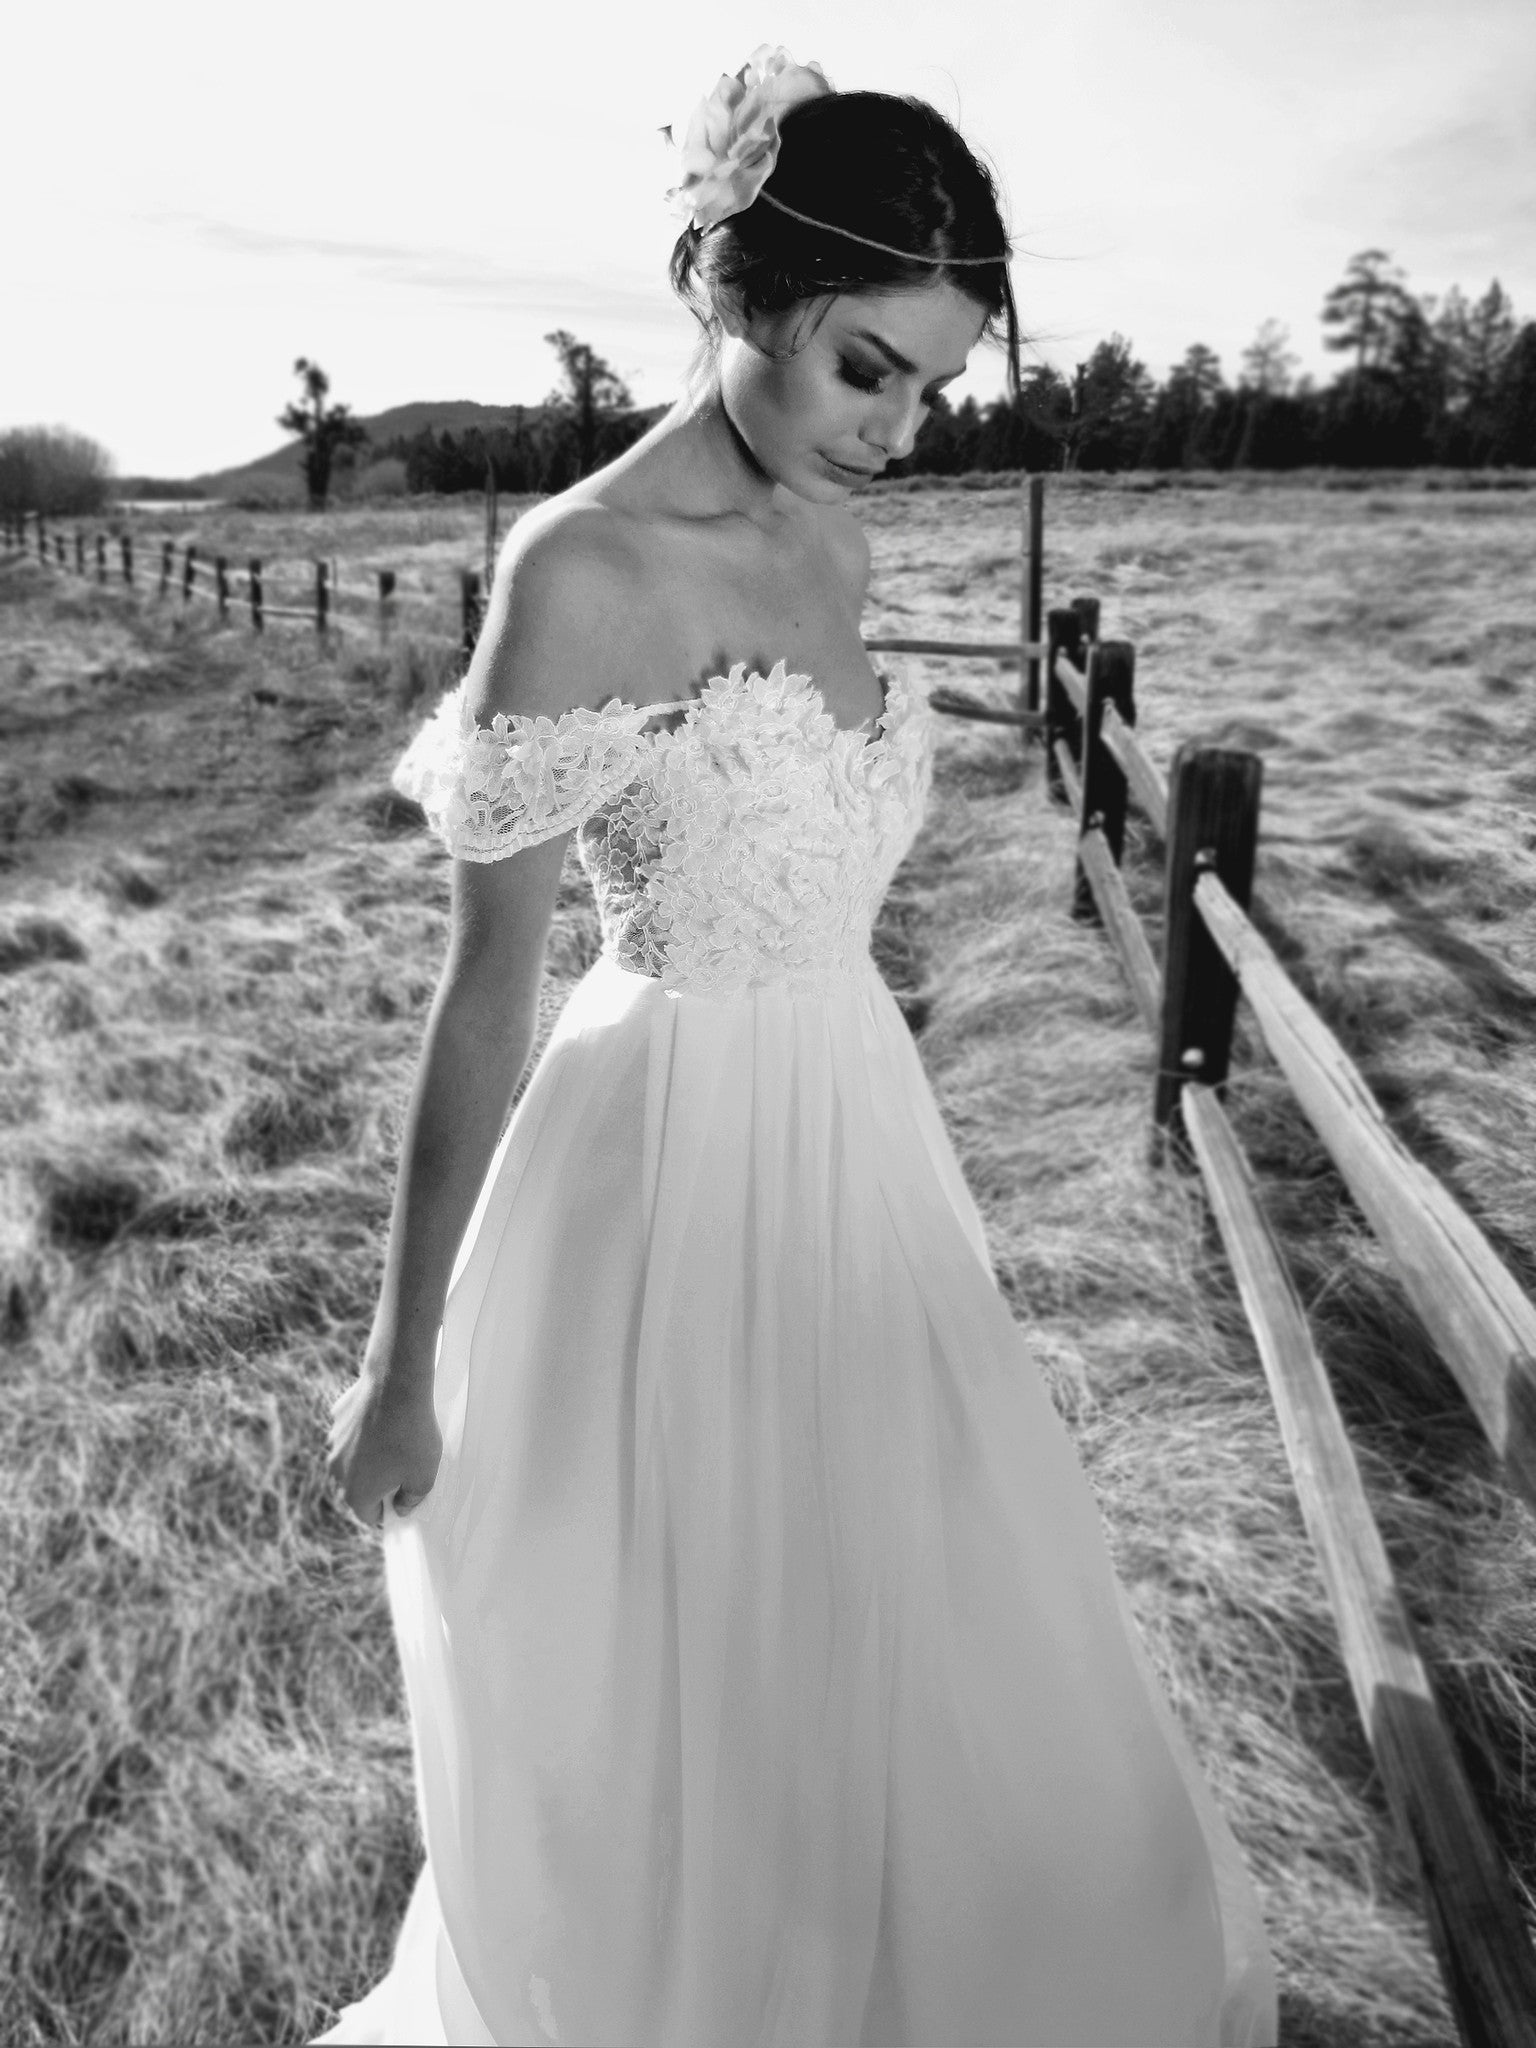 Vintage lace and chiffon off-the-shoulder wedding gown with backless illusion A-line silhouette.